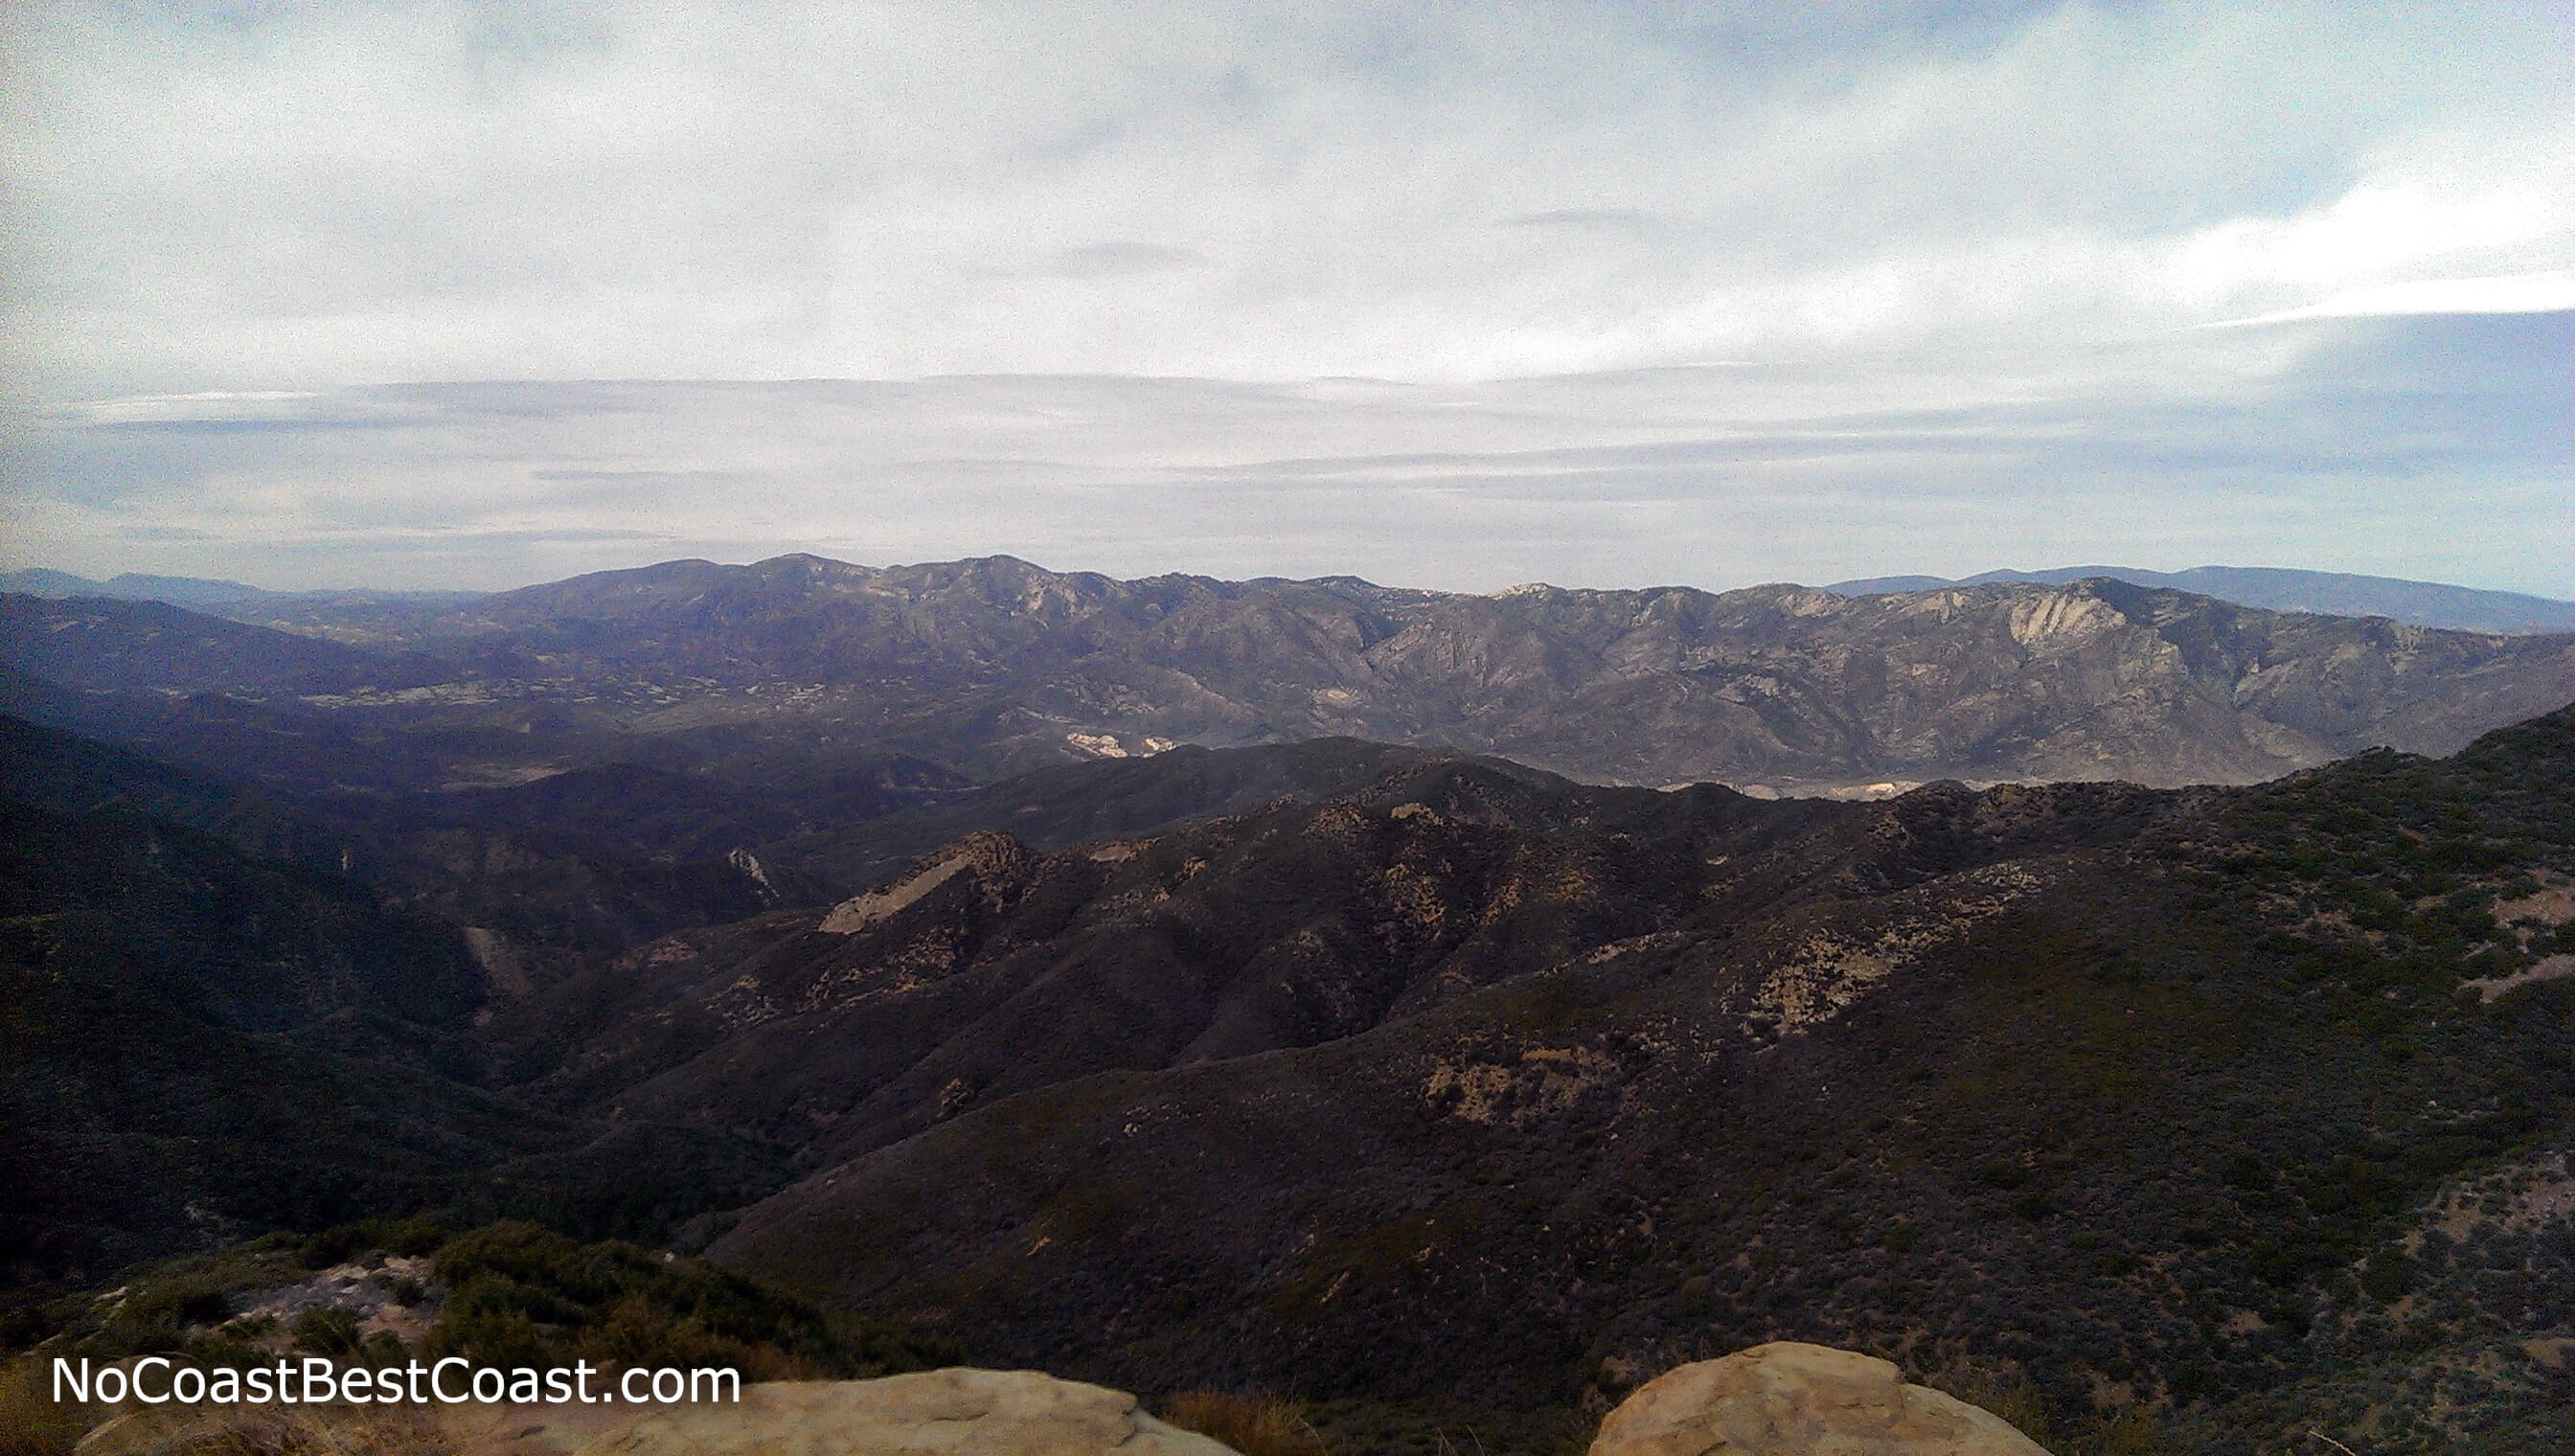 The view north deeper into the Los Padres National Forest